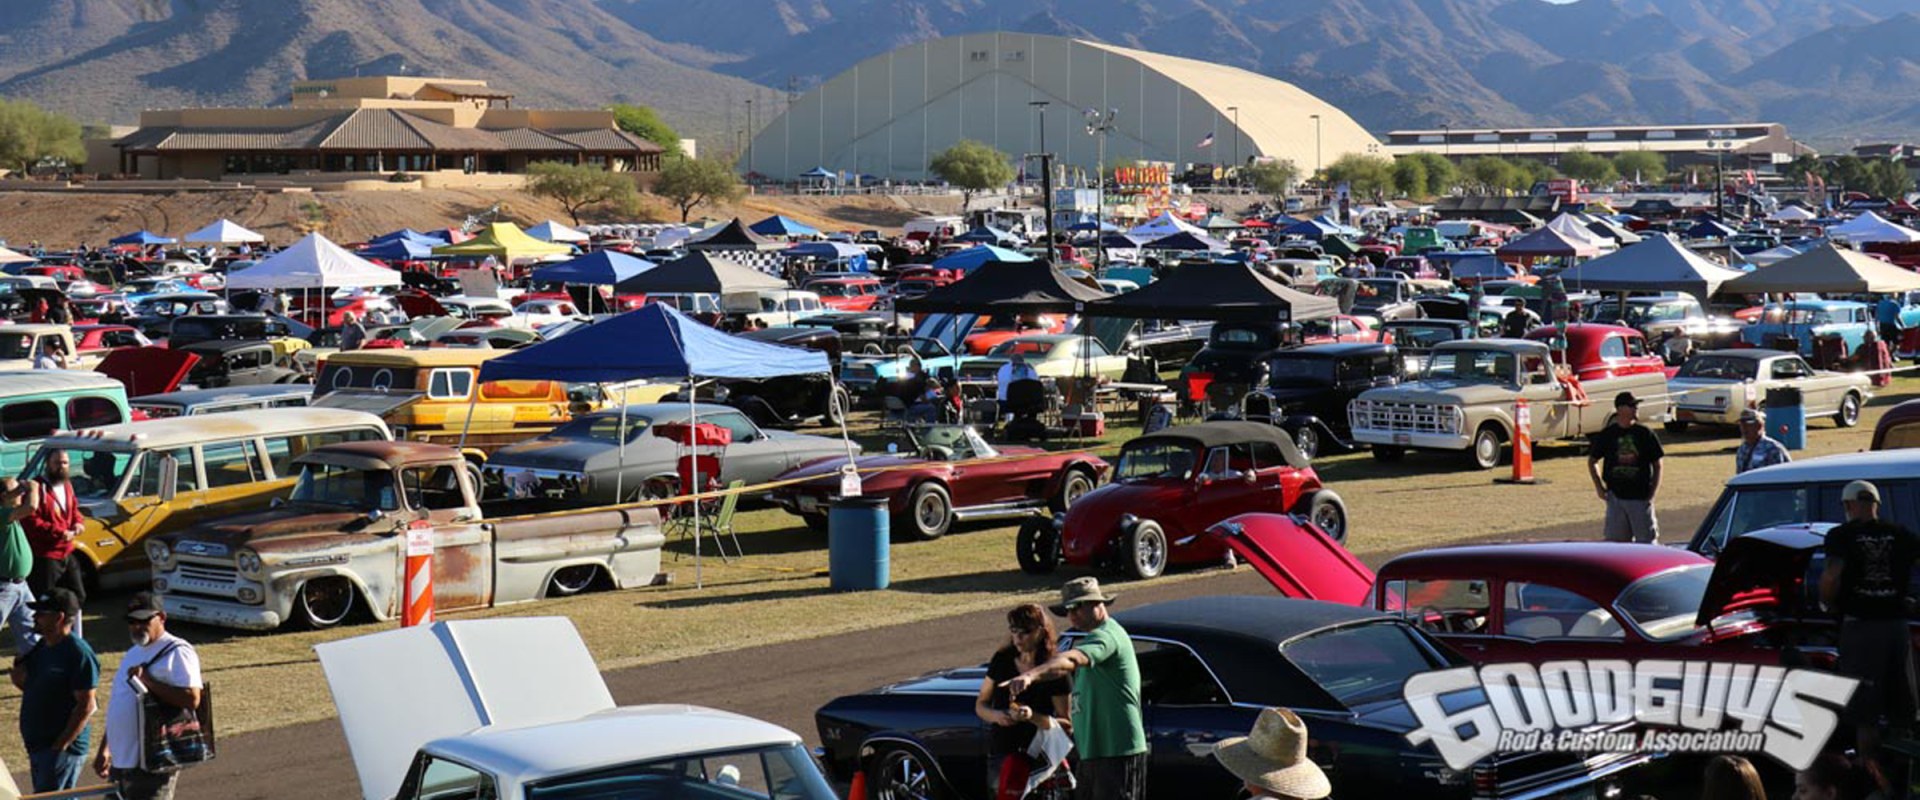 A Comprehensive Look into the Goodguys Southwest Nationals Car Show